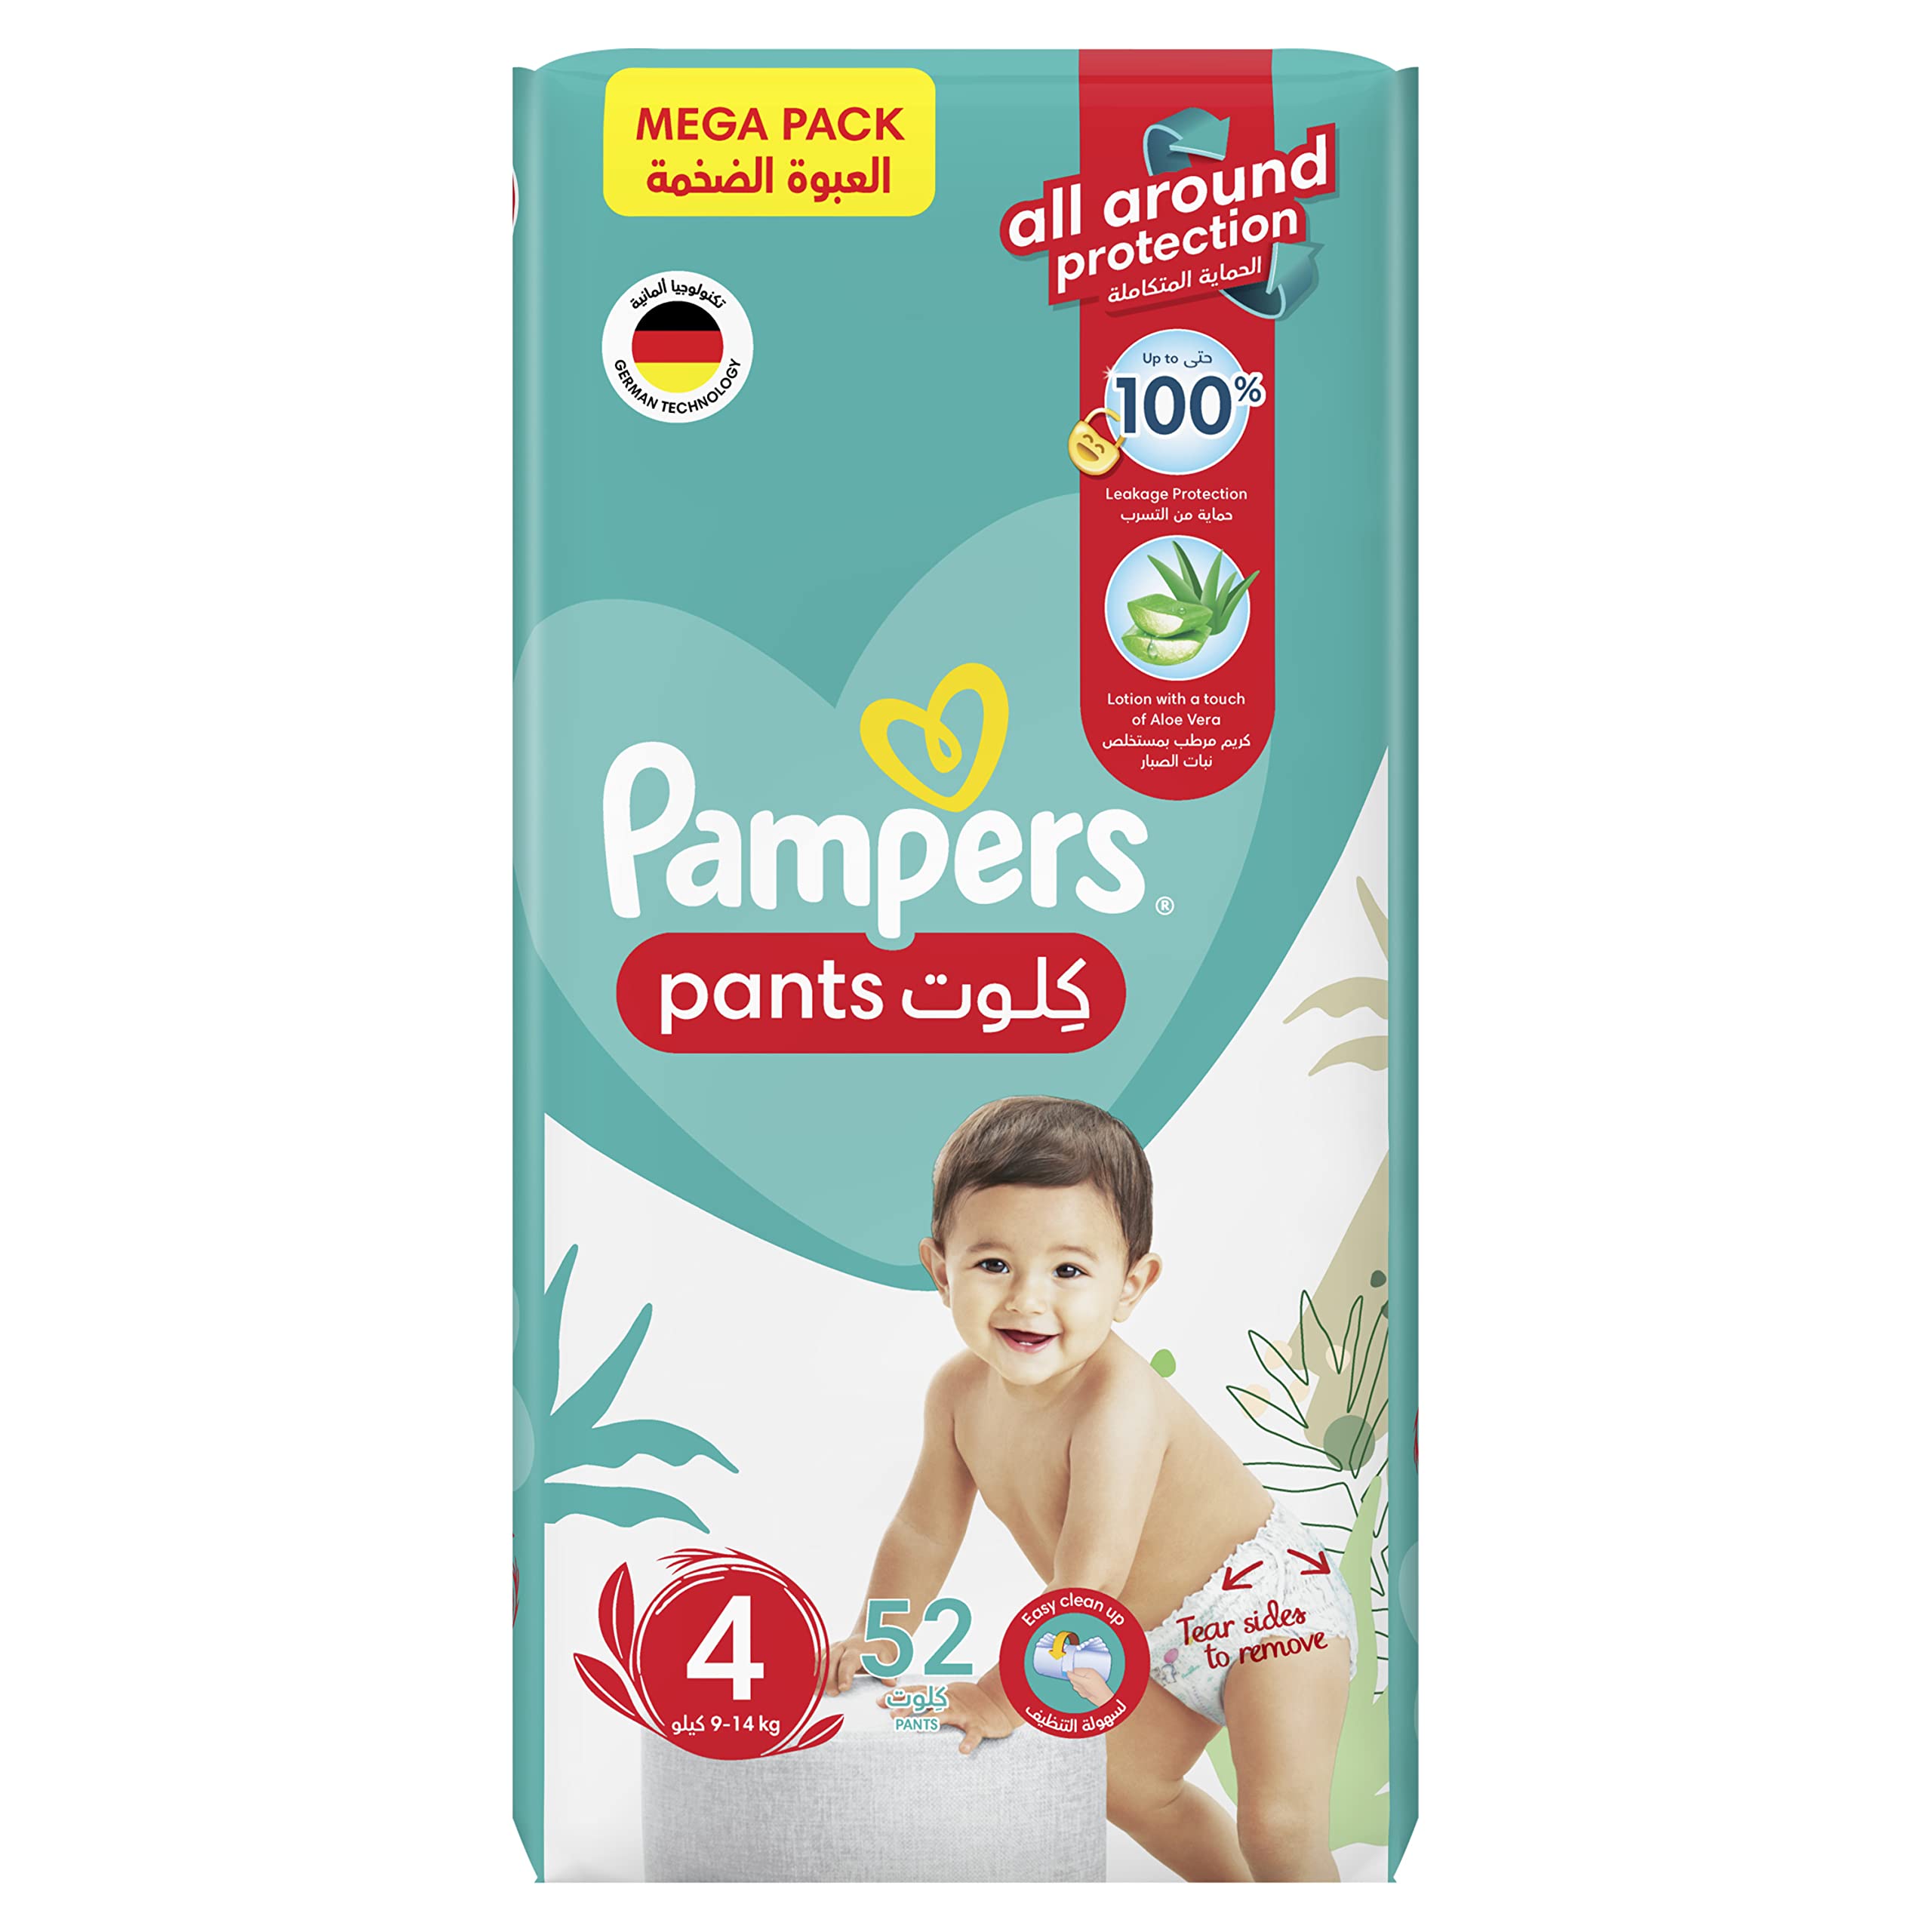 Pampers Baby-Dry Pants Diapers Size 4, 9-14kg With Stretchy Sides for Better Fit 52pcs حفاضات بامبرز مصممة على شكل سروال داخلي، مقاس 4، عبوة ضخمة، 9-14 كغم، 52 قطعة